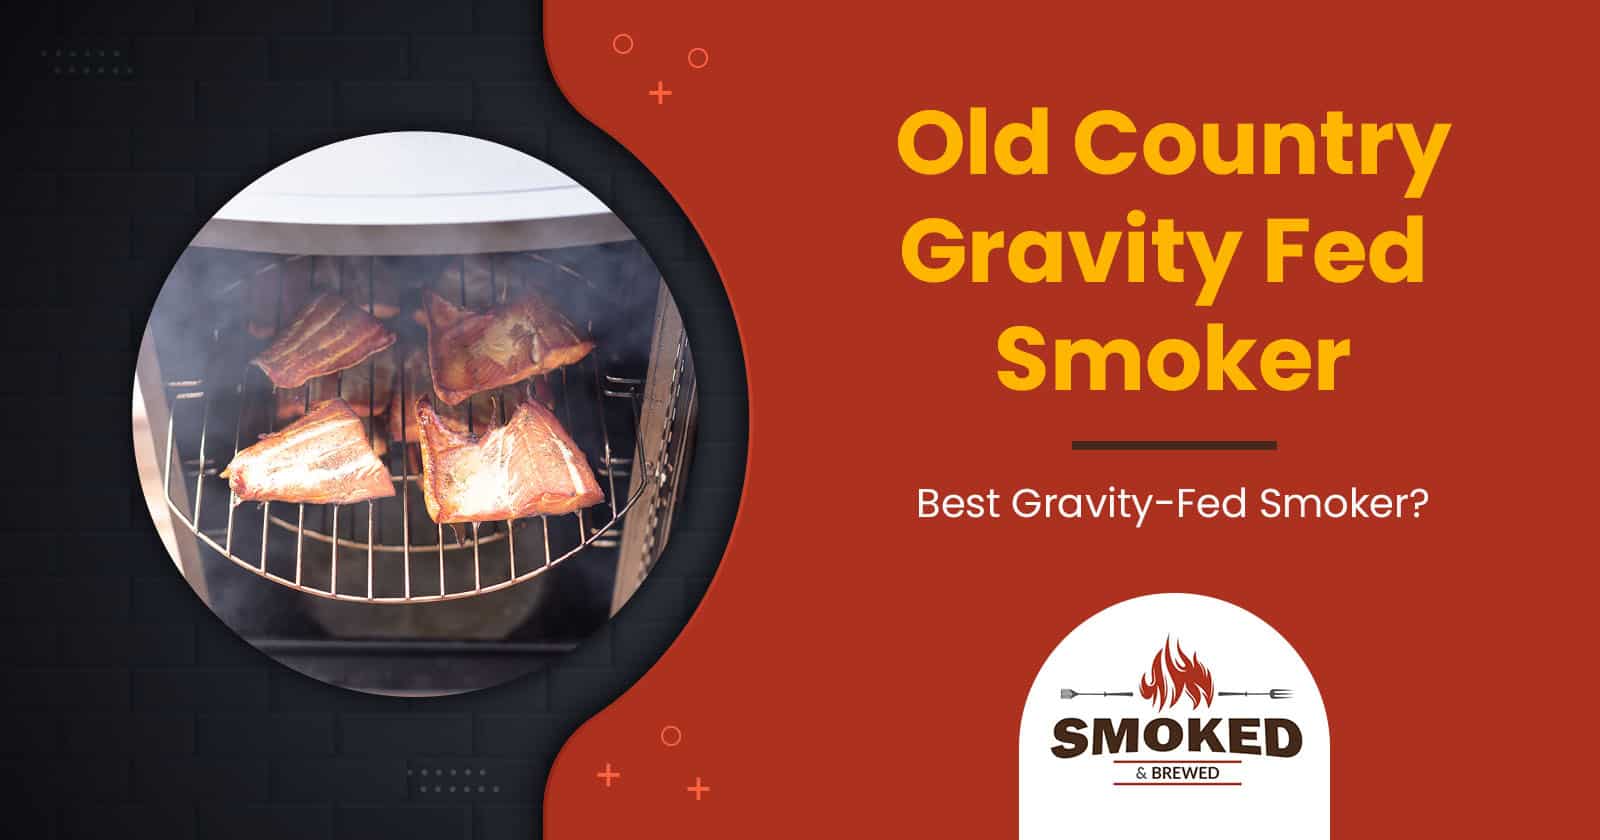 Old Country Gravity Fed Smoker &#8211; Best Gravity-Fed Smoker?